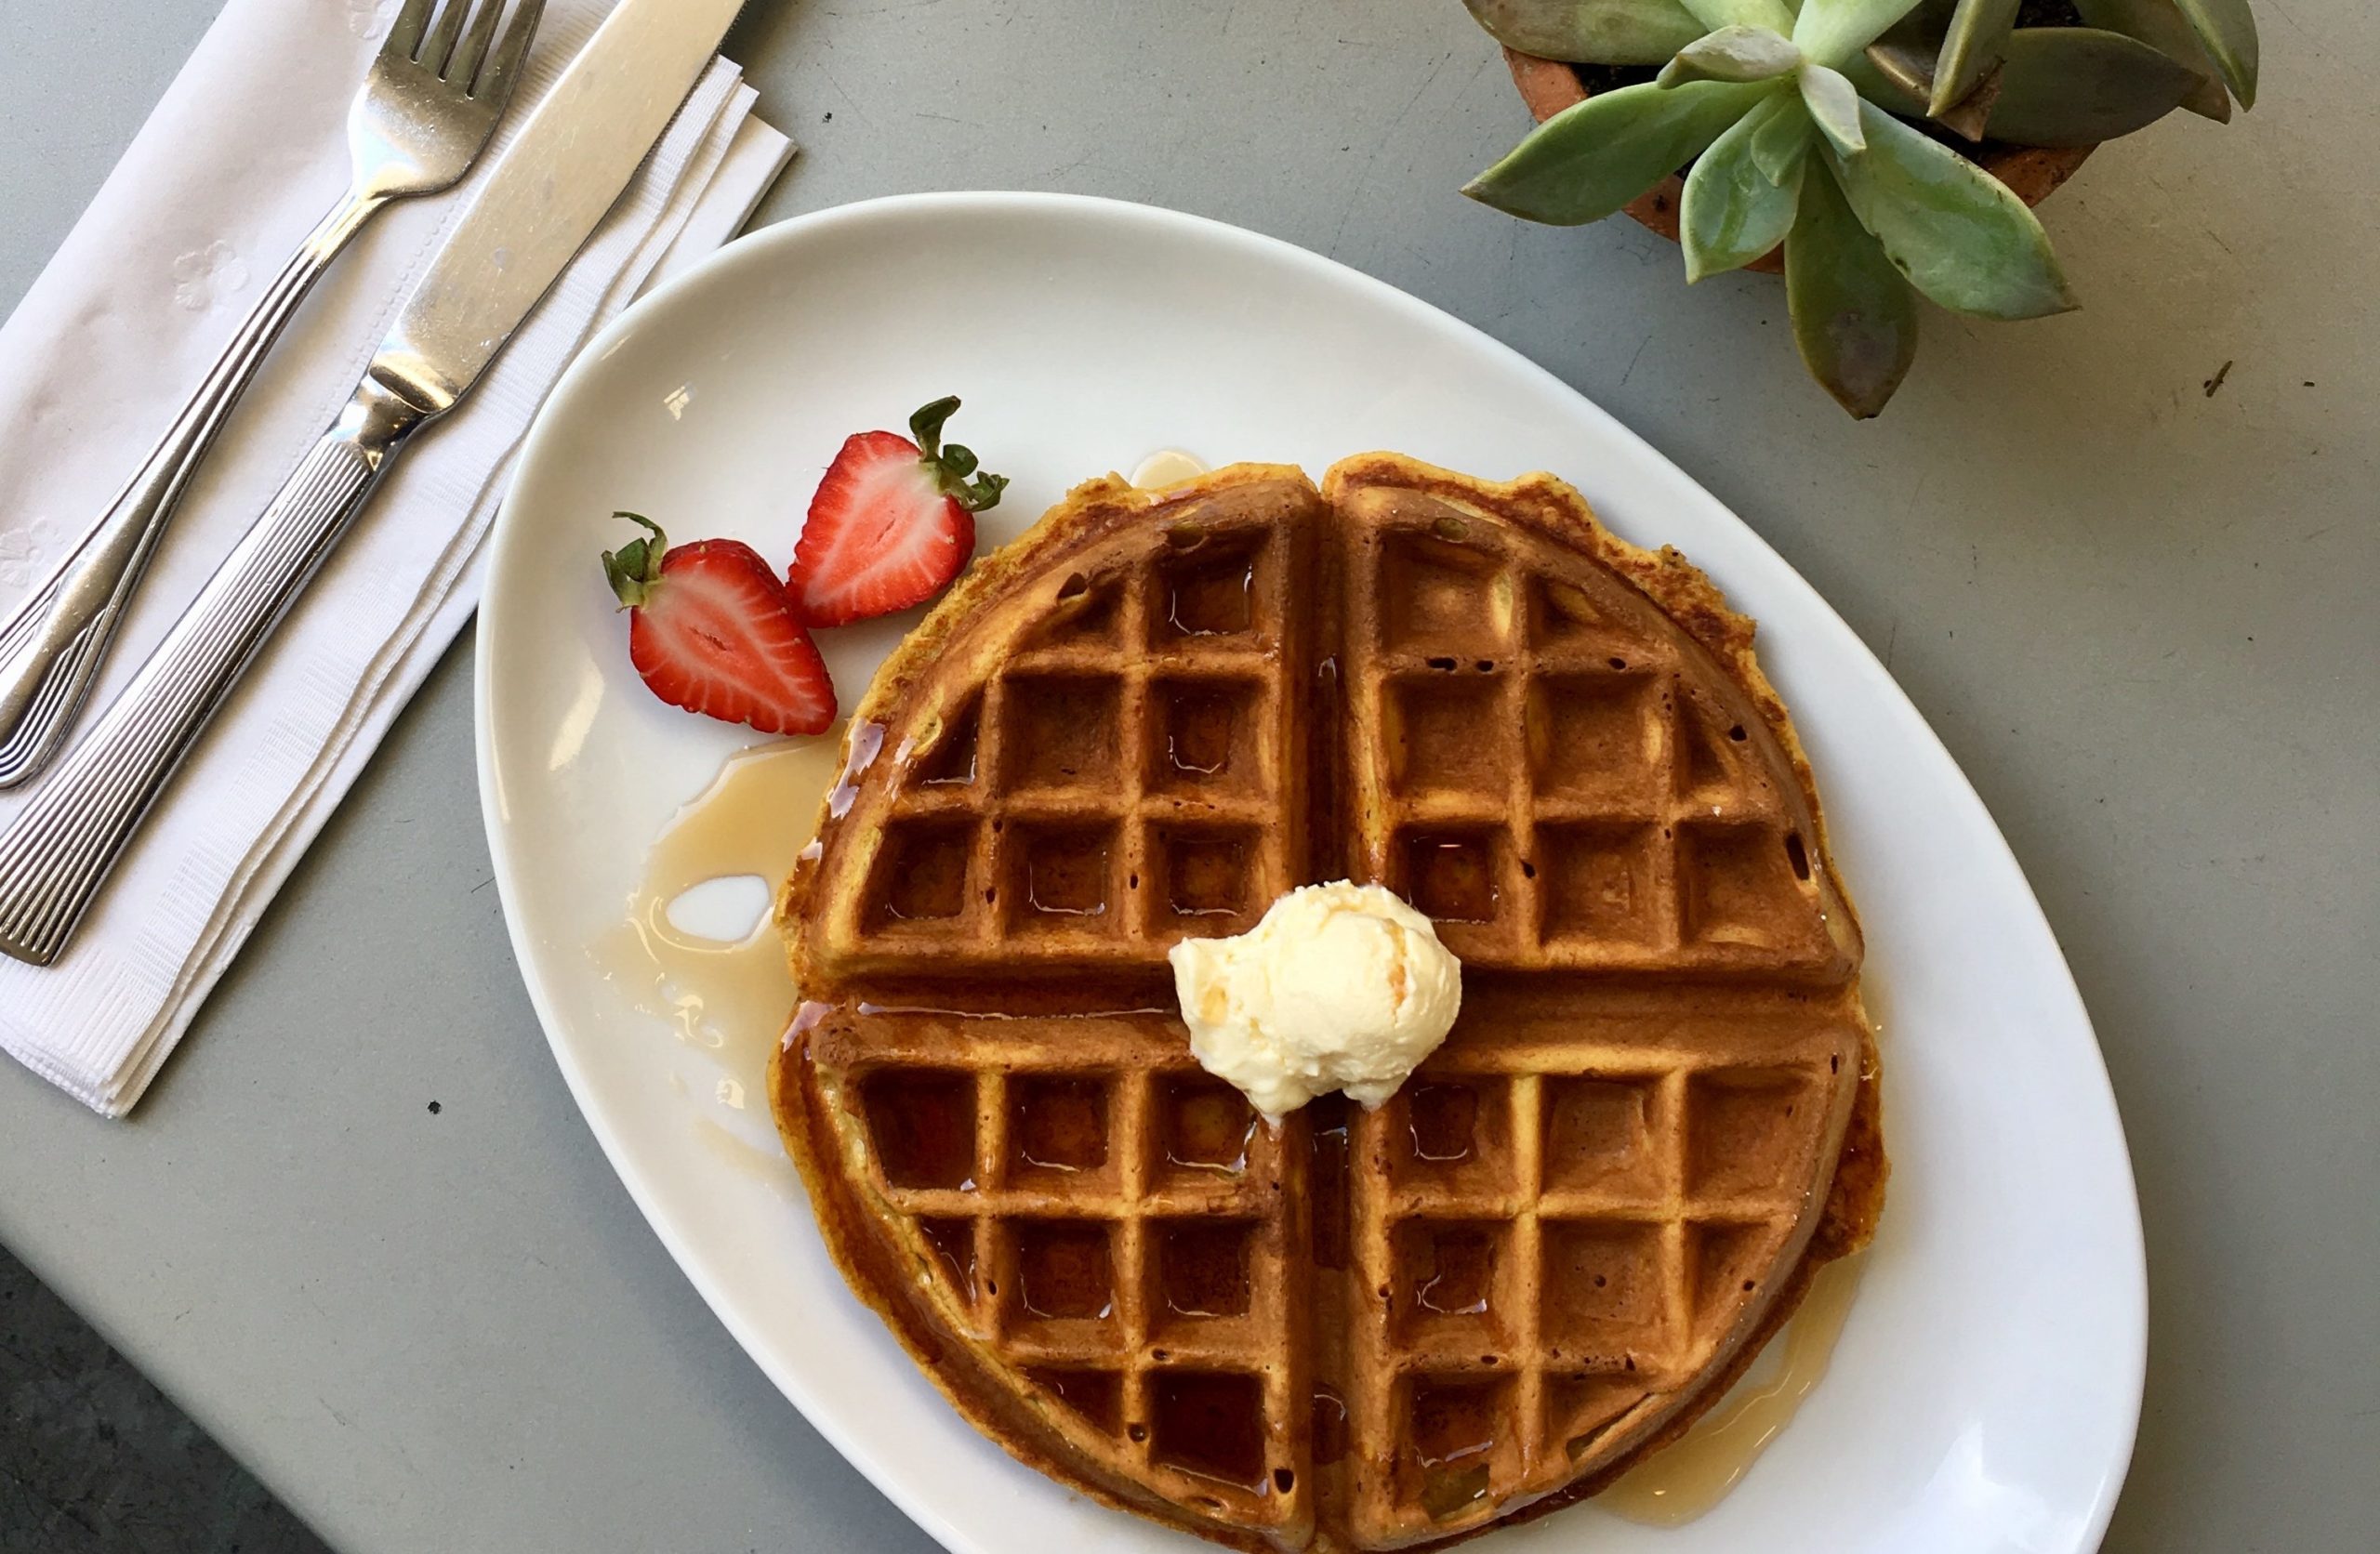 Celebrate Cafe 222s anniversary with their renowned pumpkin waffles. 